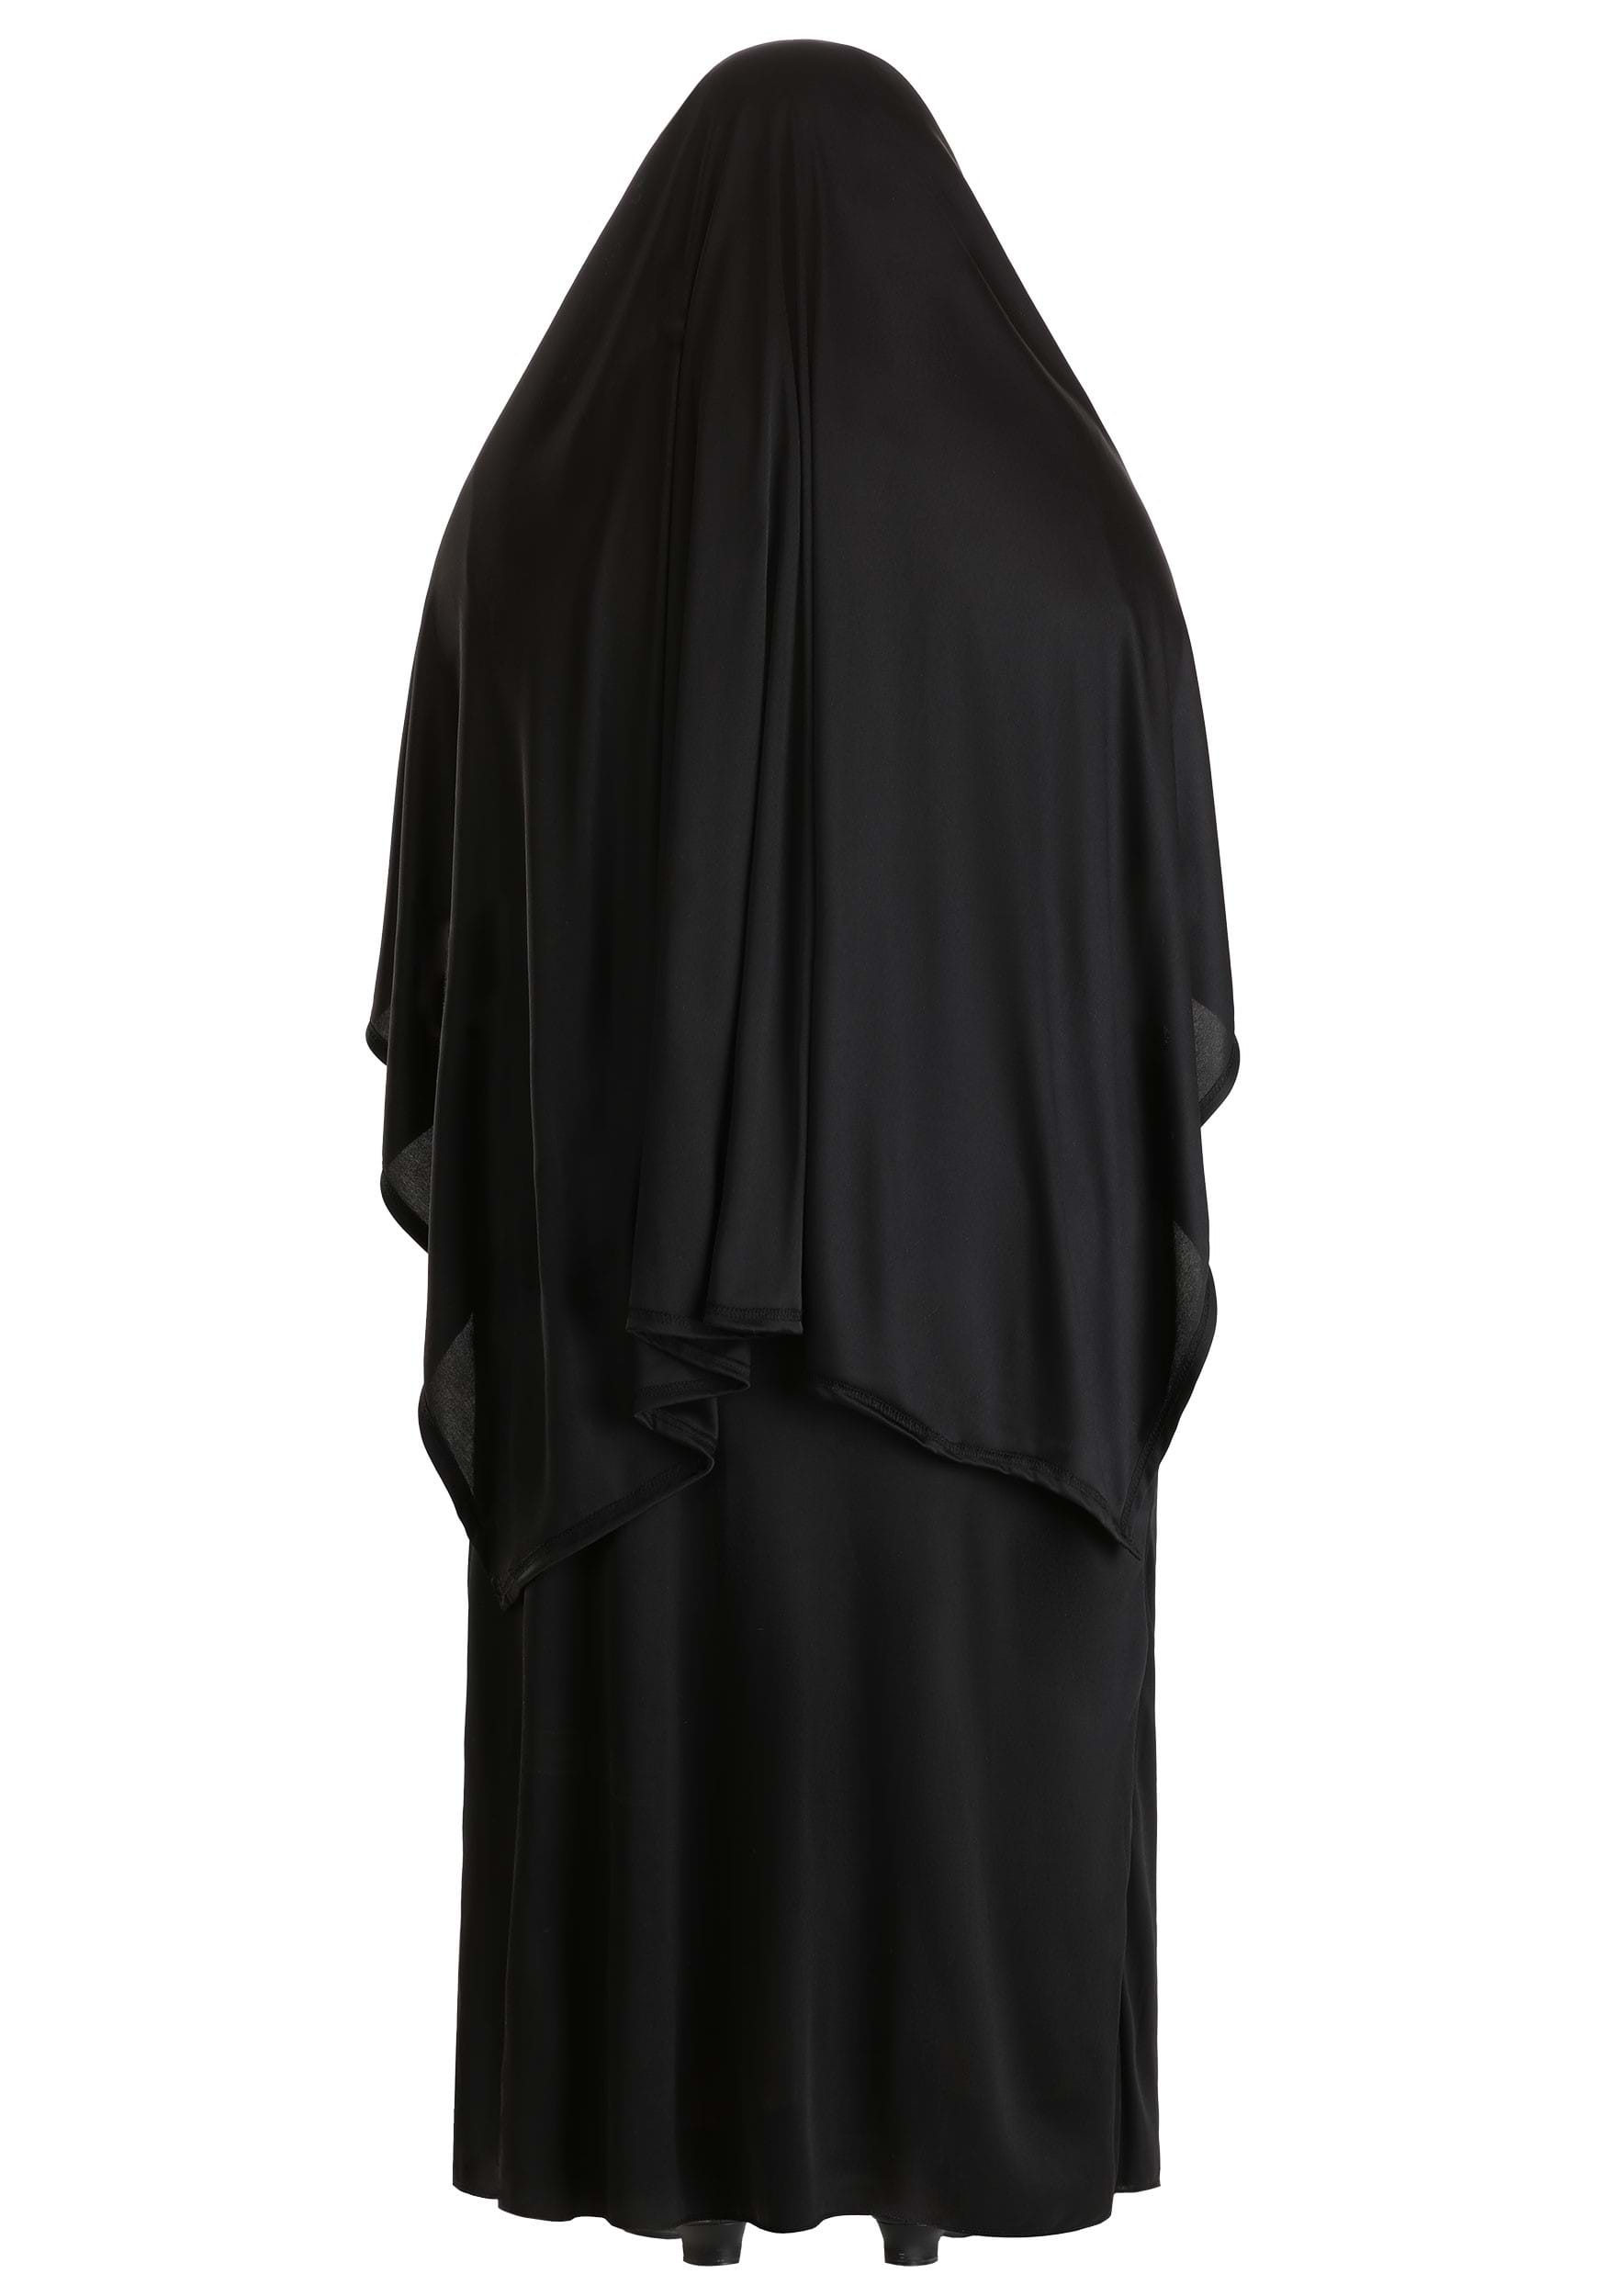 Traditional Nun Plus Size Costume For Women , Religious Costumes